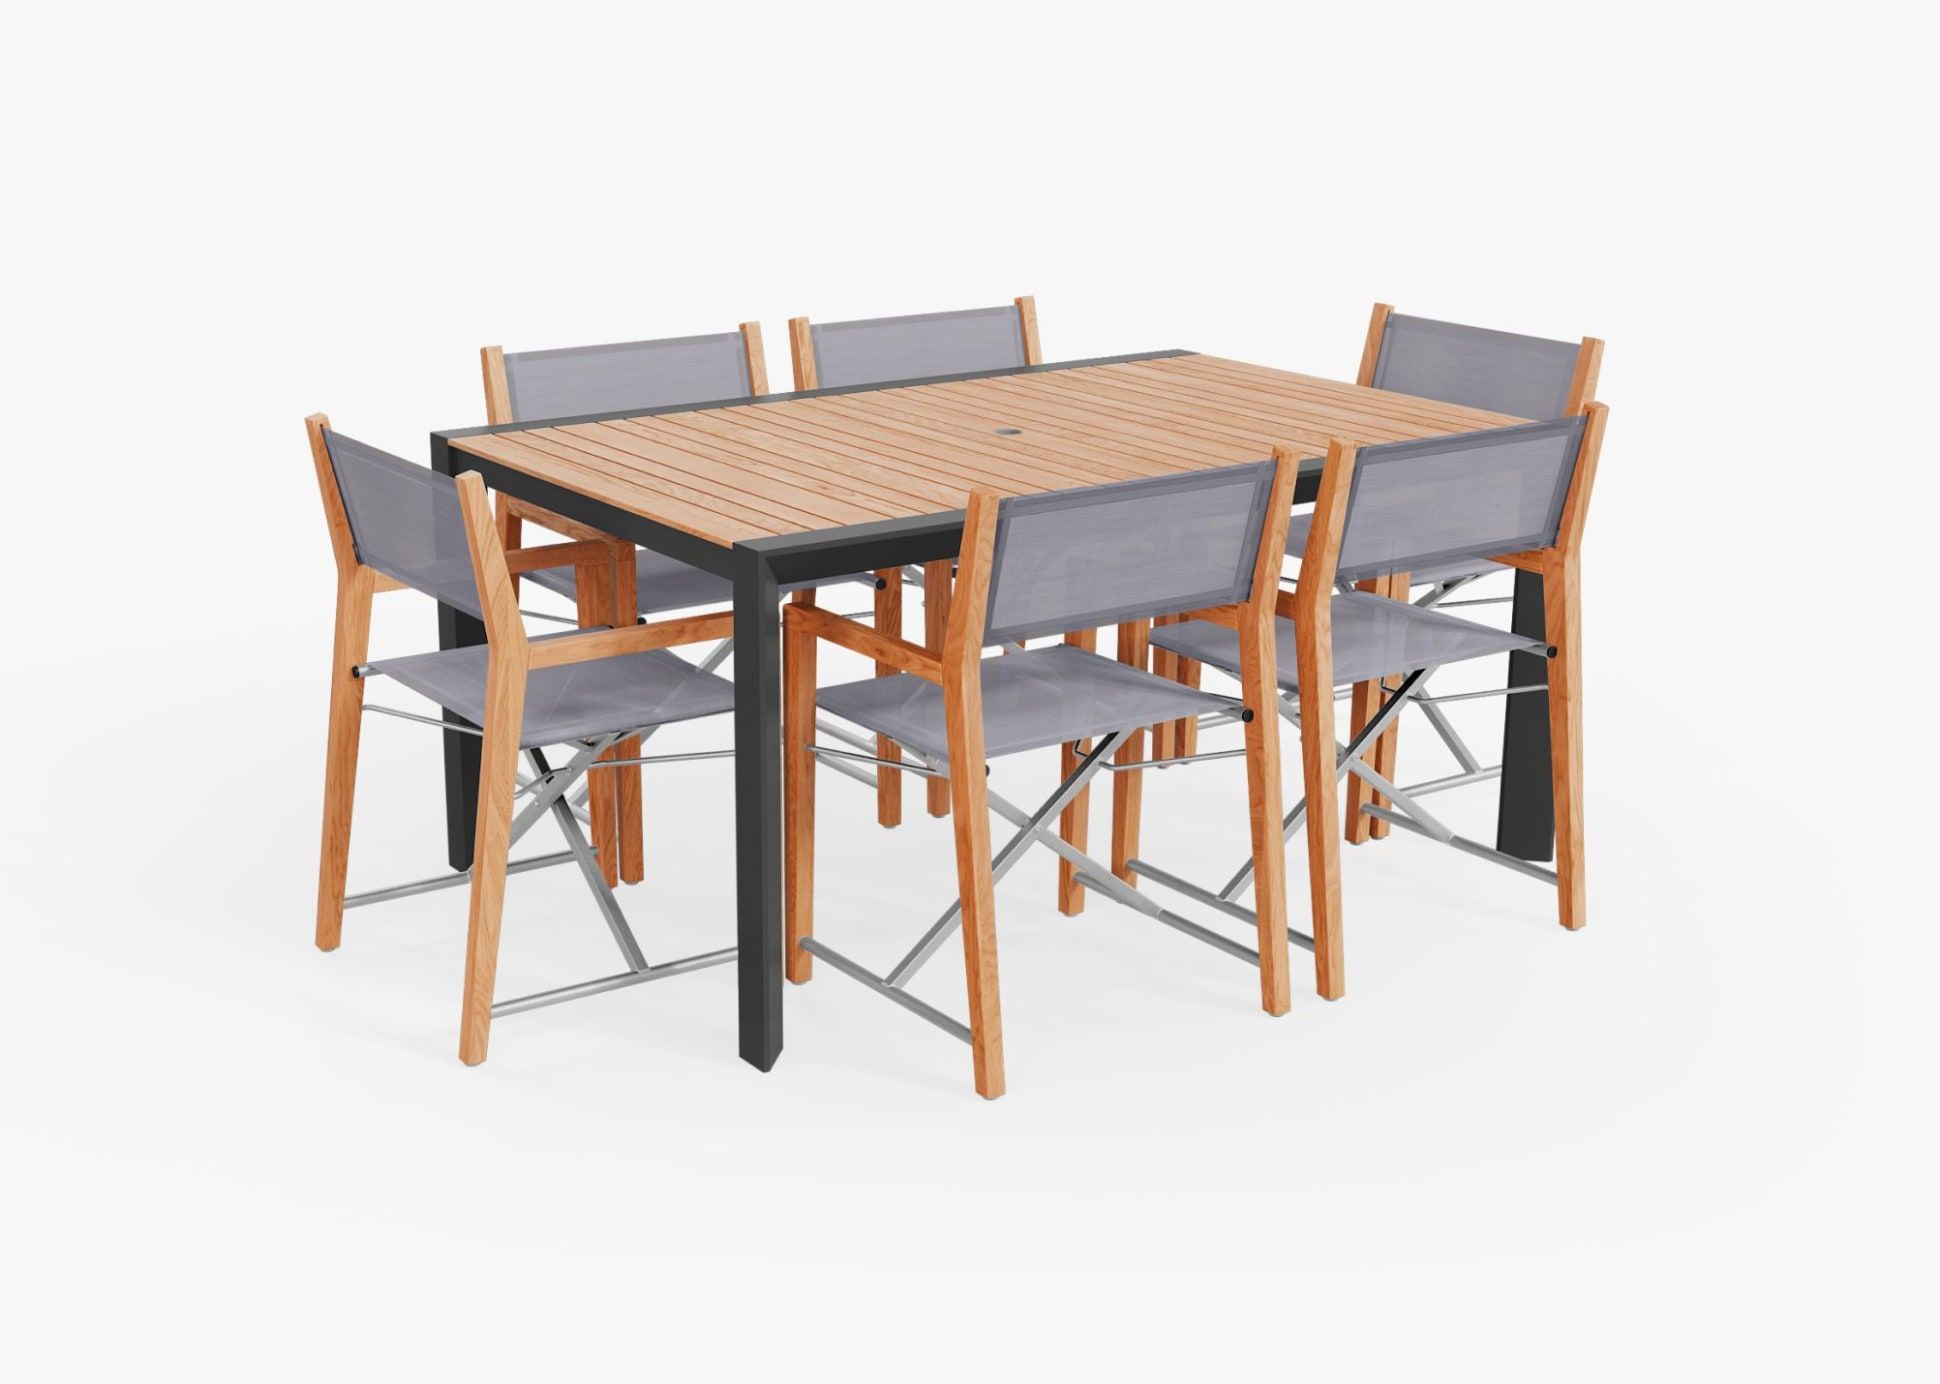 Teak & Aluminum Outdoor Dining Table & Chairs